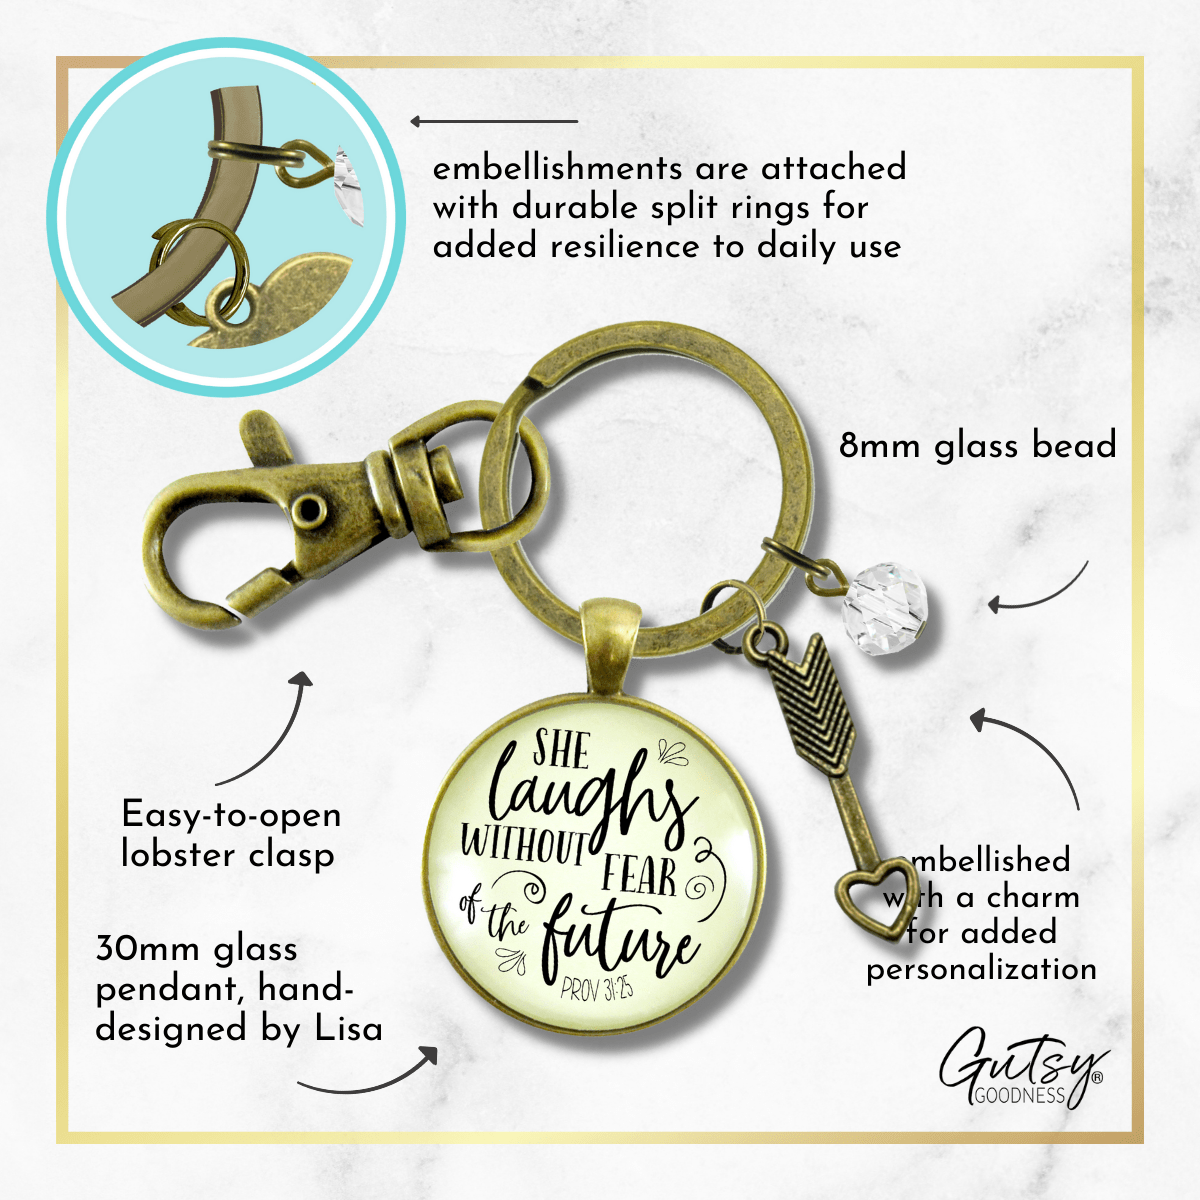 Faith Keychain She Laughs Without Fear Inspirational Pendant Jewelry For Women - Gutsy Goodness;Faith Keychain She Laughs Without Fear Inspirational Pendant Jewelry For Women - Gutsy Goodness Handmade Jewelry Gifts